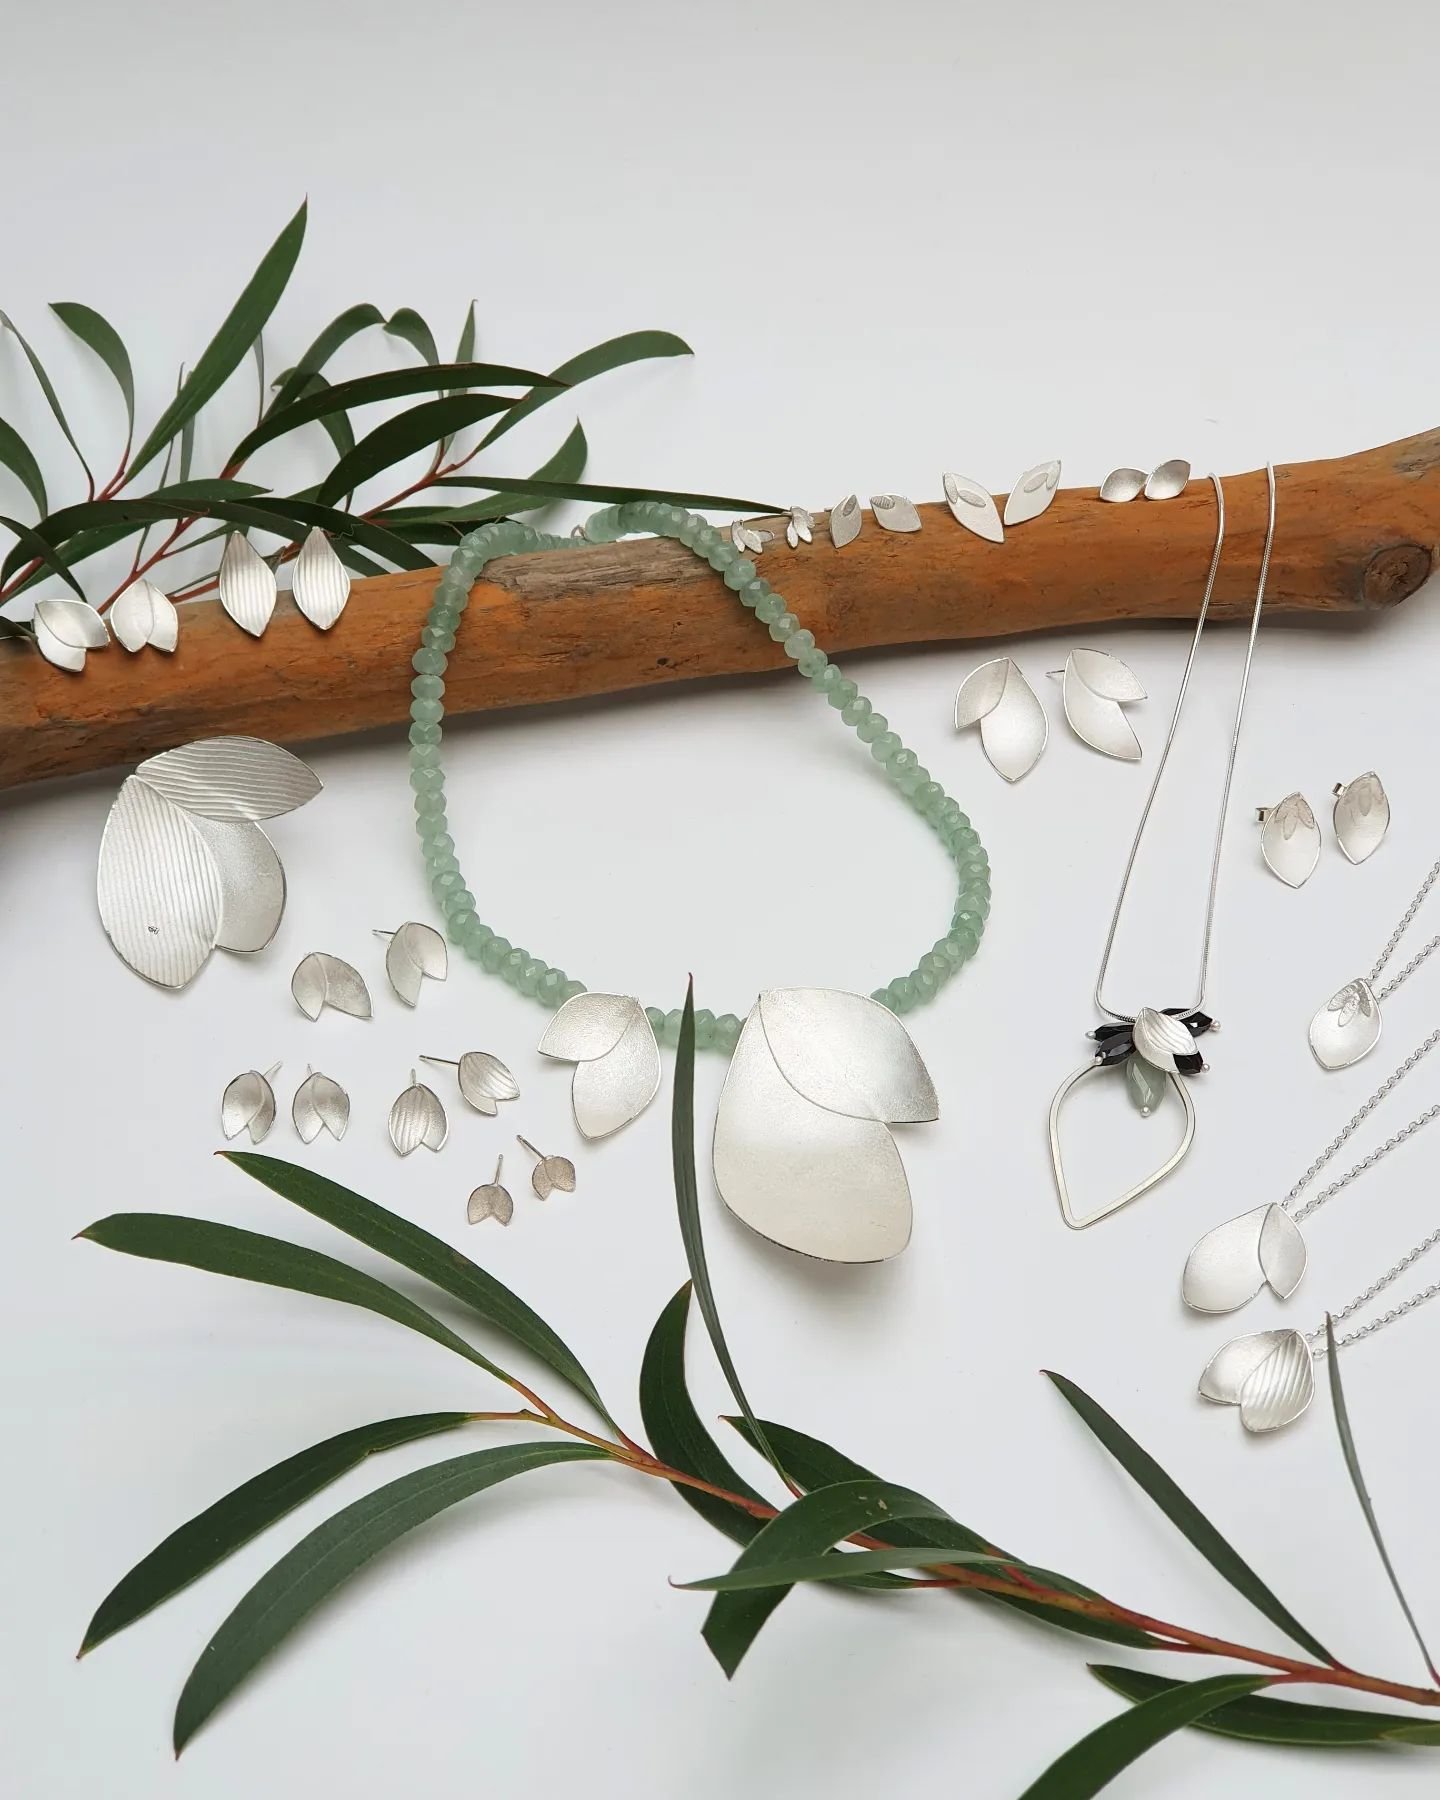 A lovely new collection has just landed at the fabulous @thebiscuitfactorygallery in Newcastle. 

All handmade by myself in recycled silver, and inspired by my favourite foliage, Eucalyptus. ❤

Happy Sunday! 😊 

#eucalyptuscollection 
#jewellery 
#h